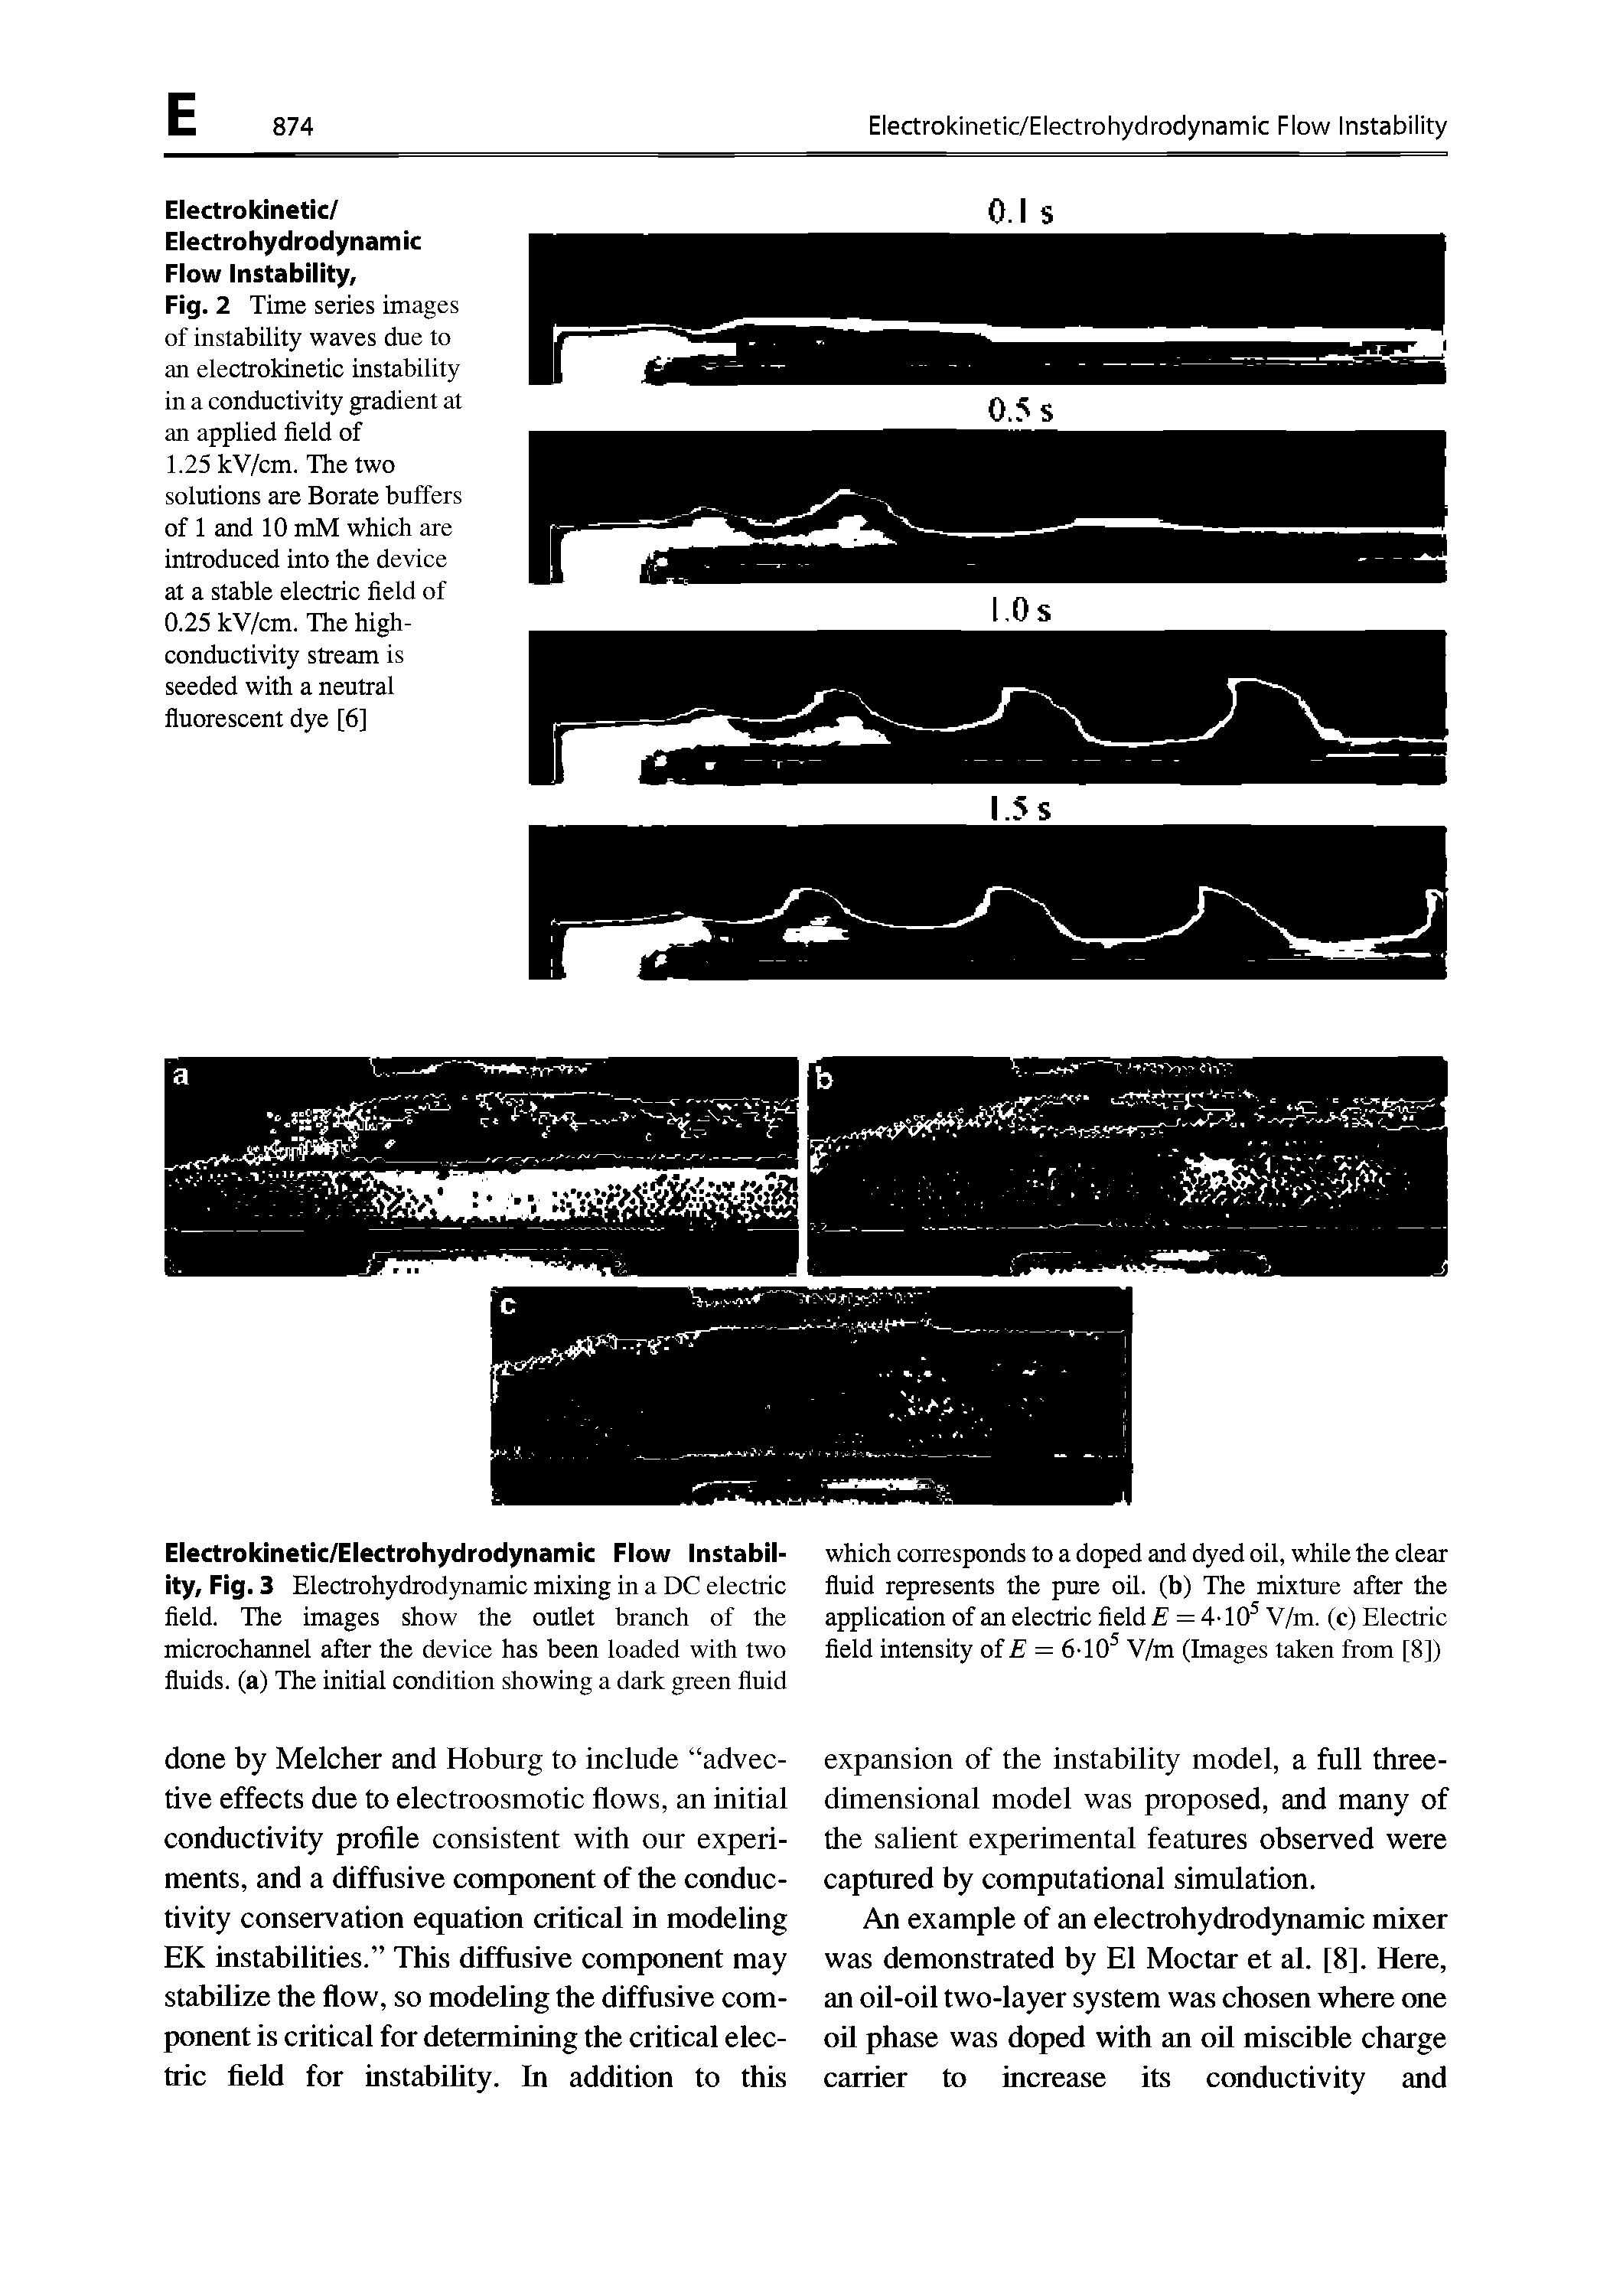 Fig. 2 Time series images of instability waves due to an electrokinetic instability in a conductivity gradient at an applied field of 1.25 kV/cm. The two solutions are Borate buffers of 1 and 10 mM which are introduced into the device at a stable electric field of 0.25 kV/cm. The high-conductivity stream is seeded with a neutral fluorescent dye [6]...